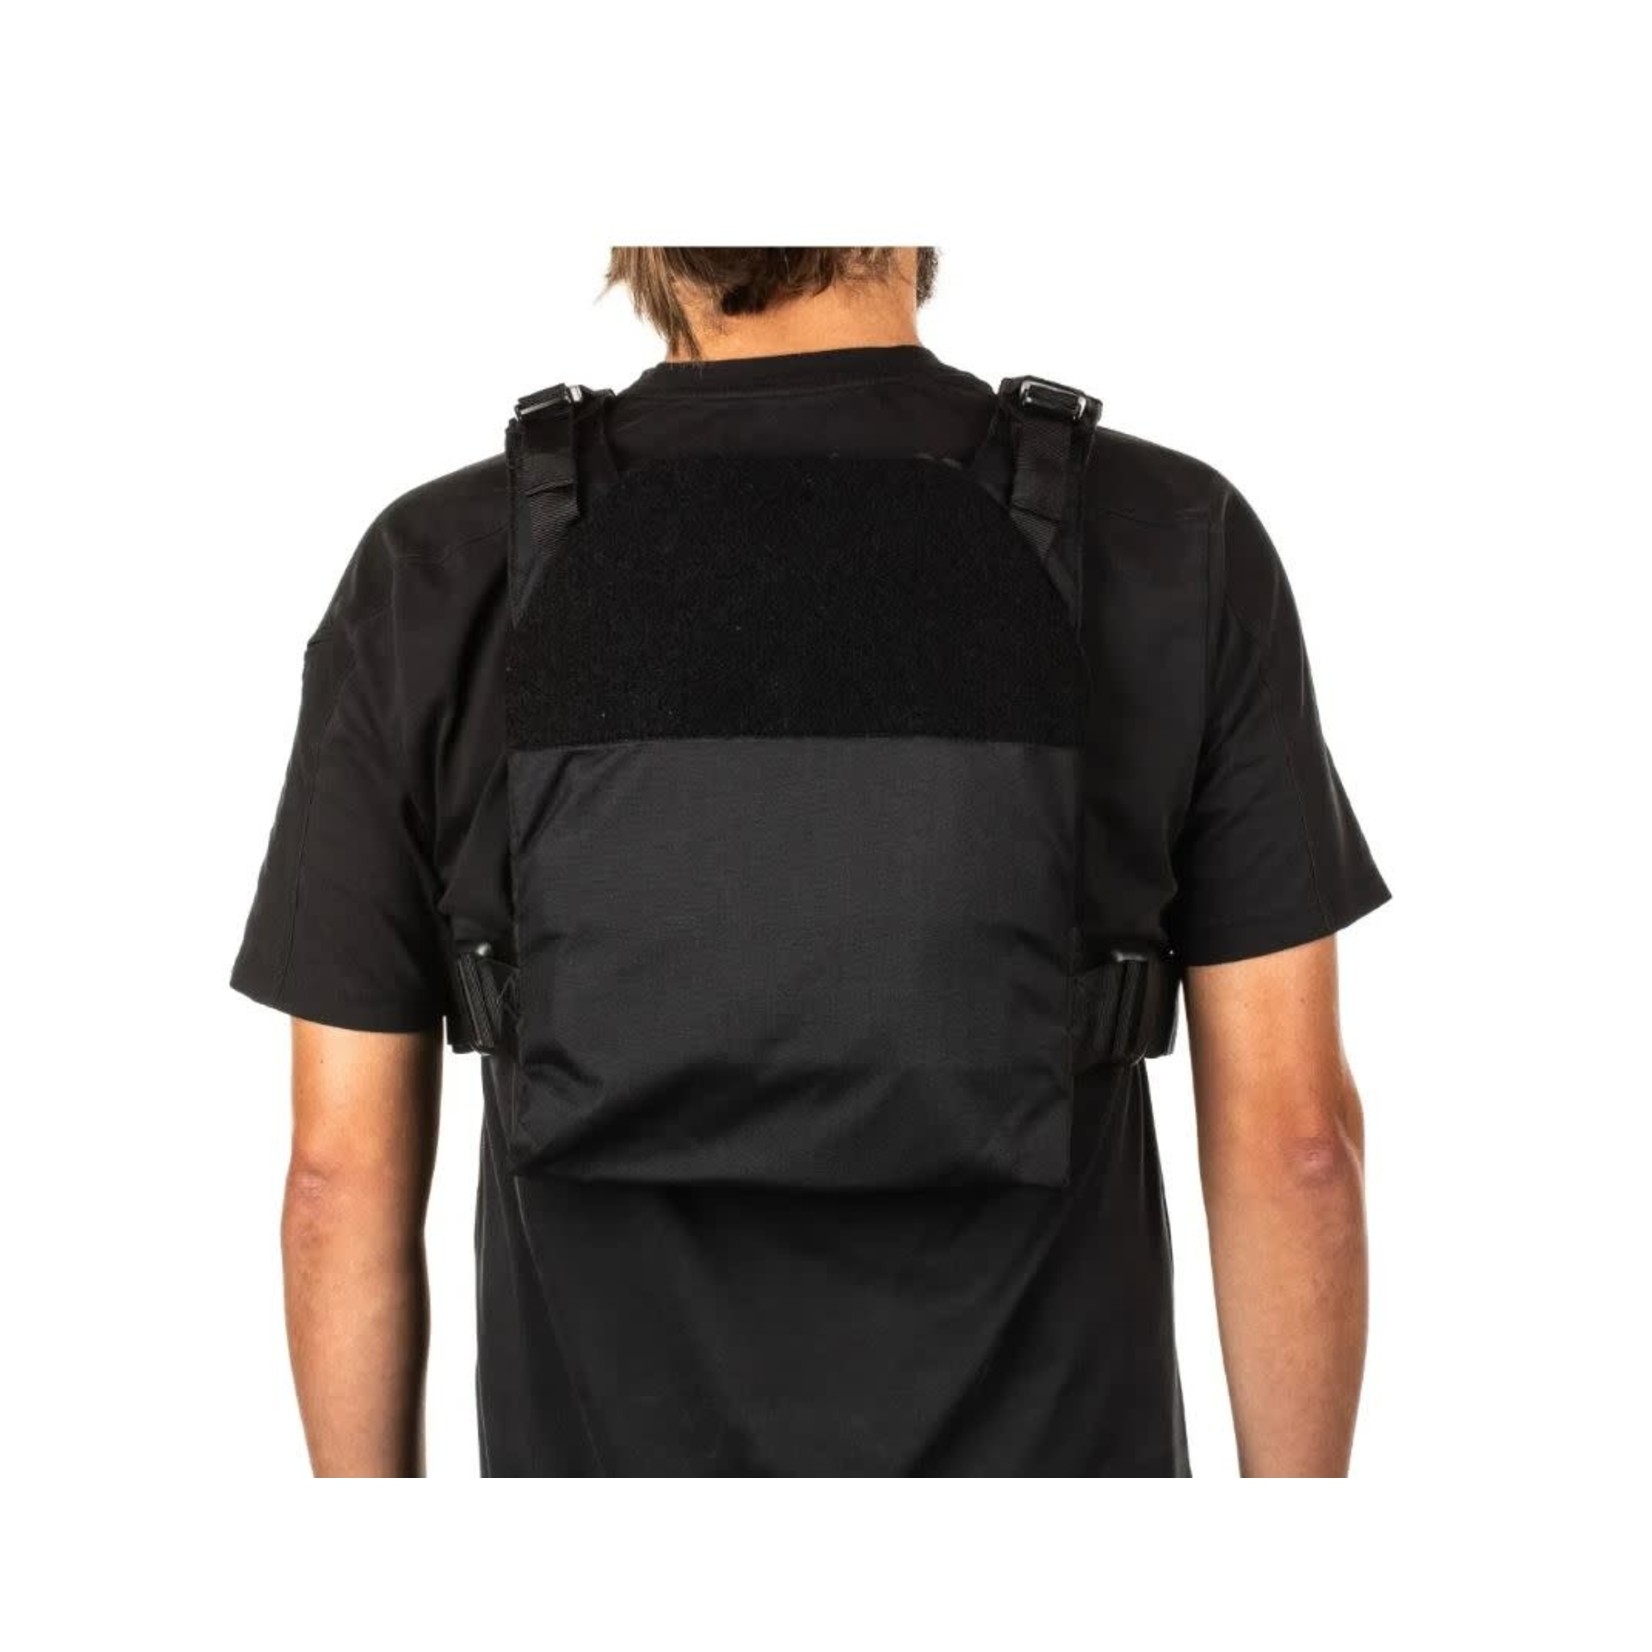 5.11 Tactical 5.11 ABR Plate Carrier